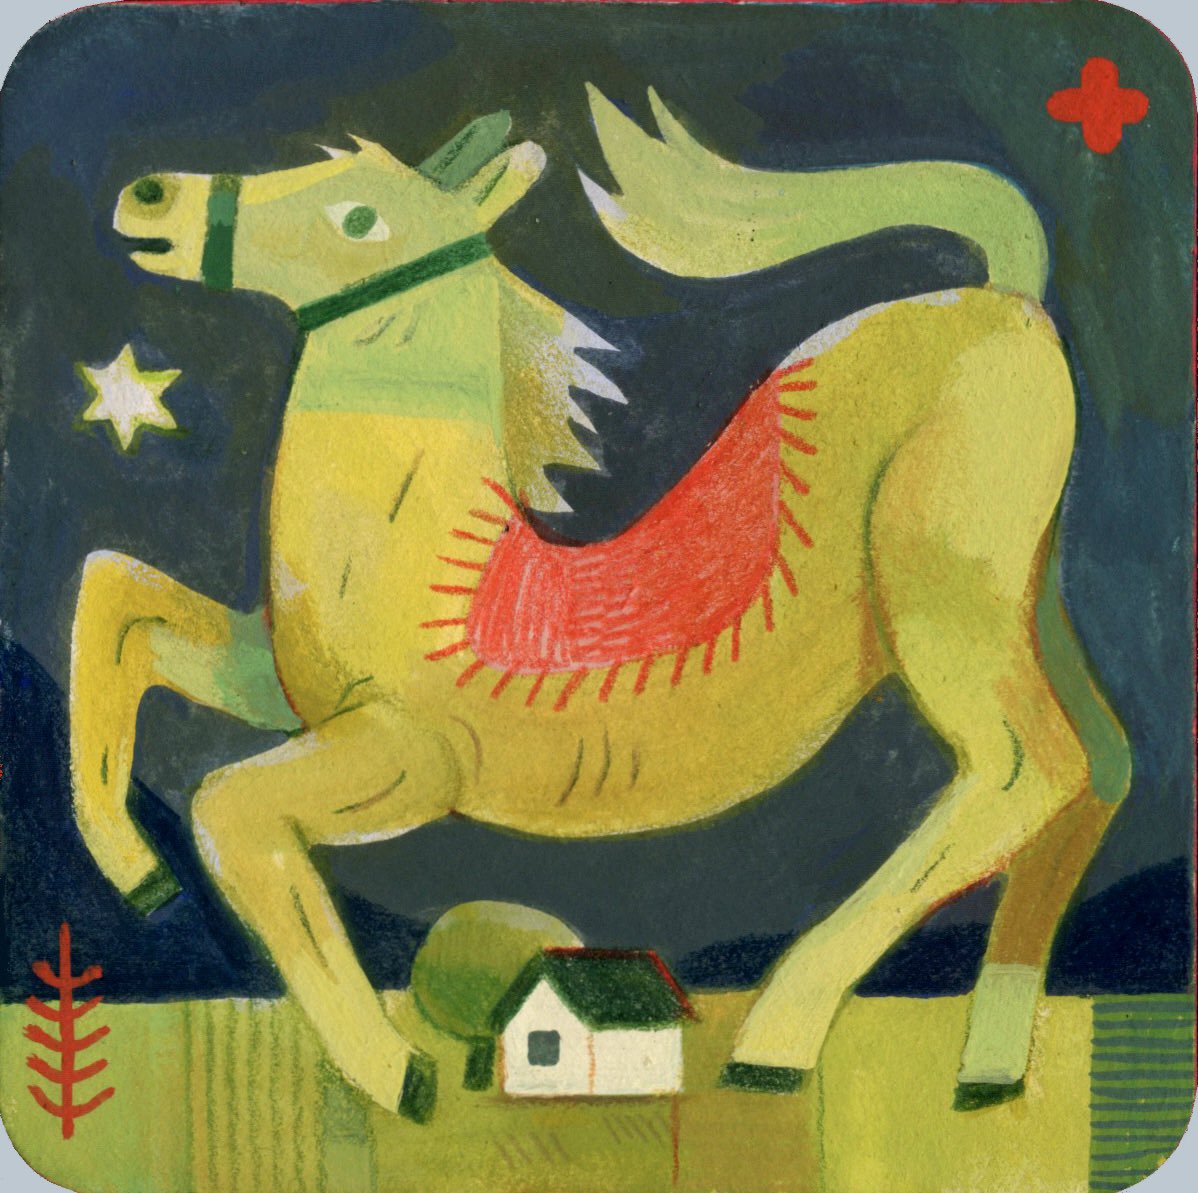 Big Green Horse coaster for Gallery Nucleus’ SALUT show